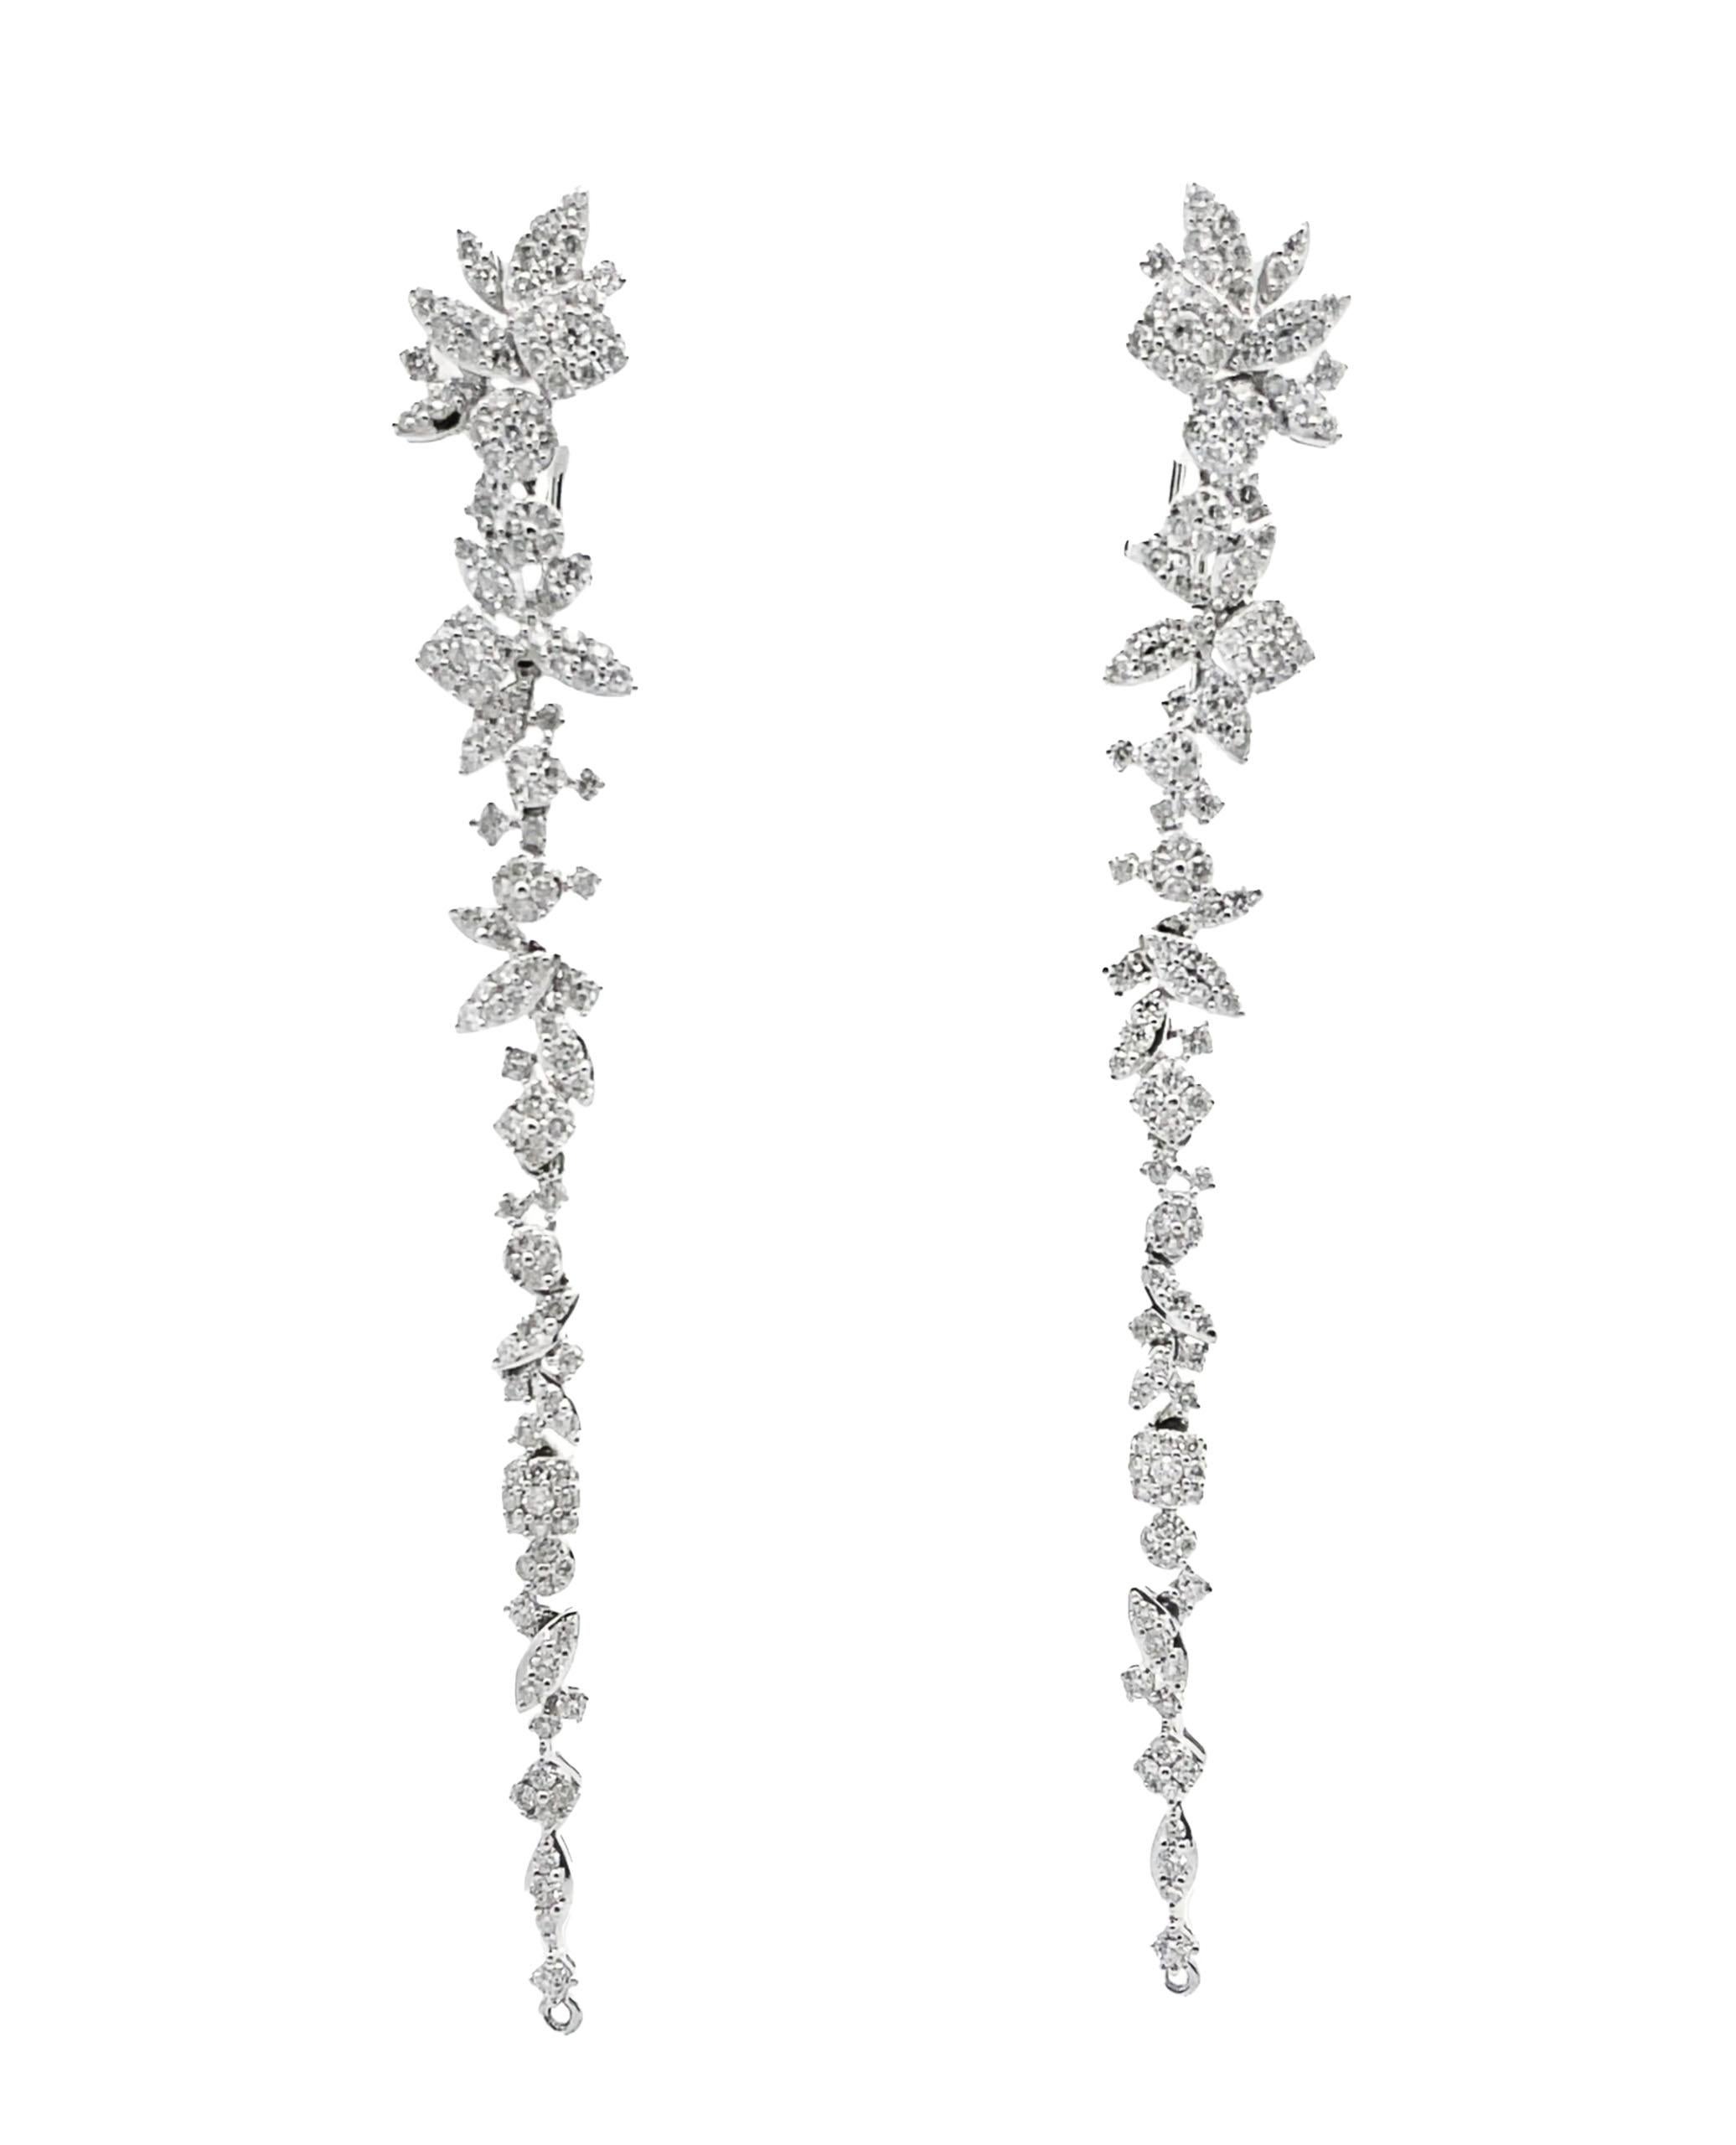 Versatile and unique 18K white gold earrings with 274 round brilliant-cut diamonds weighing 3.13 carats total. May be worn straight long or clipped short pear shape. 

- Diamonds are G/H color, SI clarity.
- 3.5 inches long when worn straight.
-